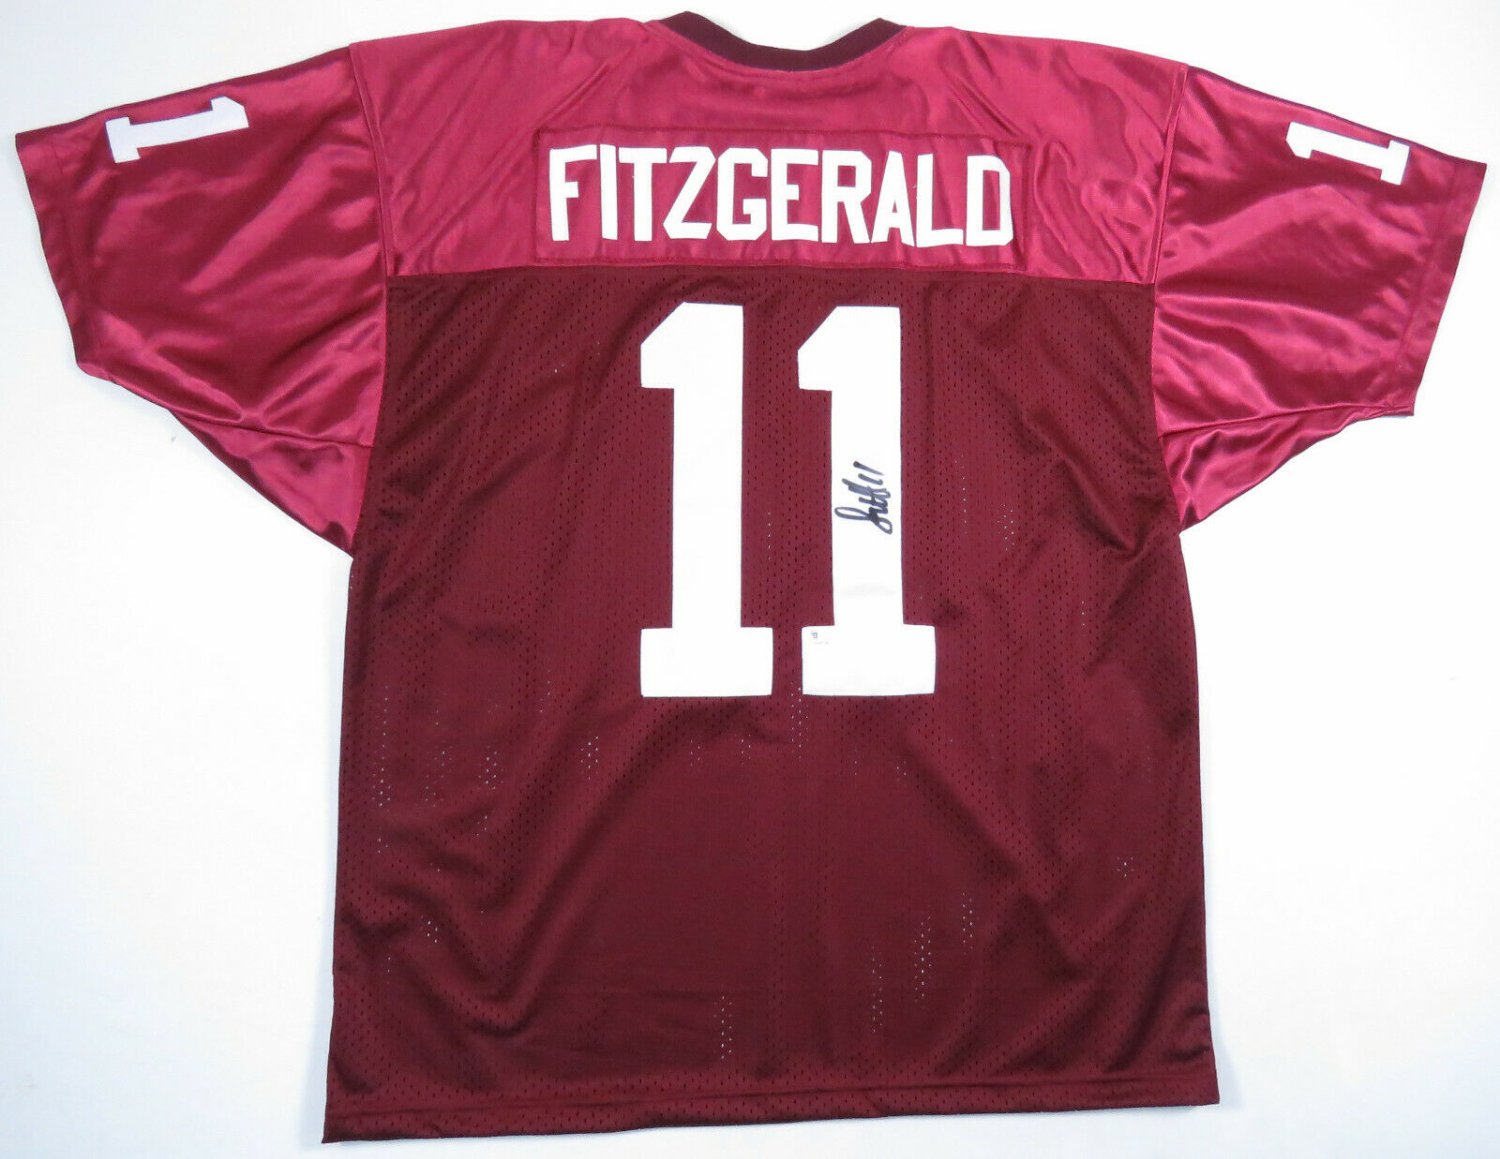 larry fitzgerald signed jersey